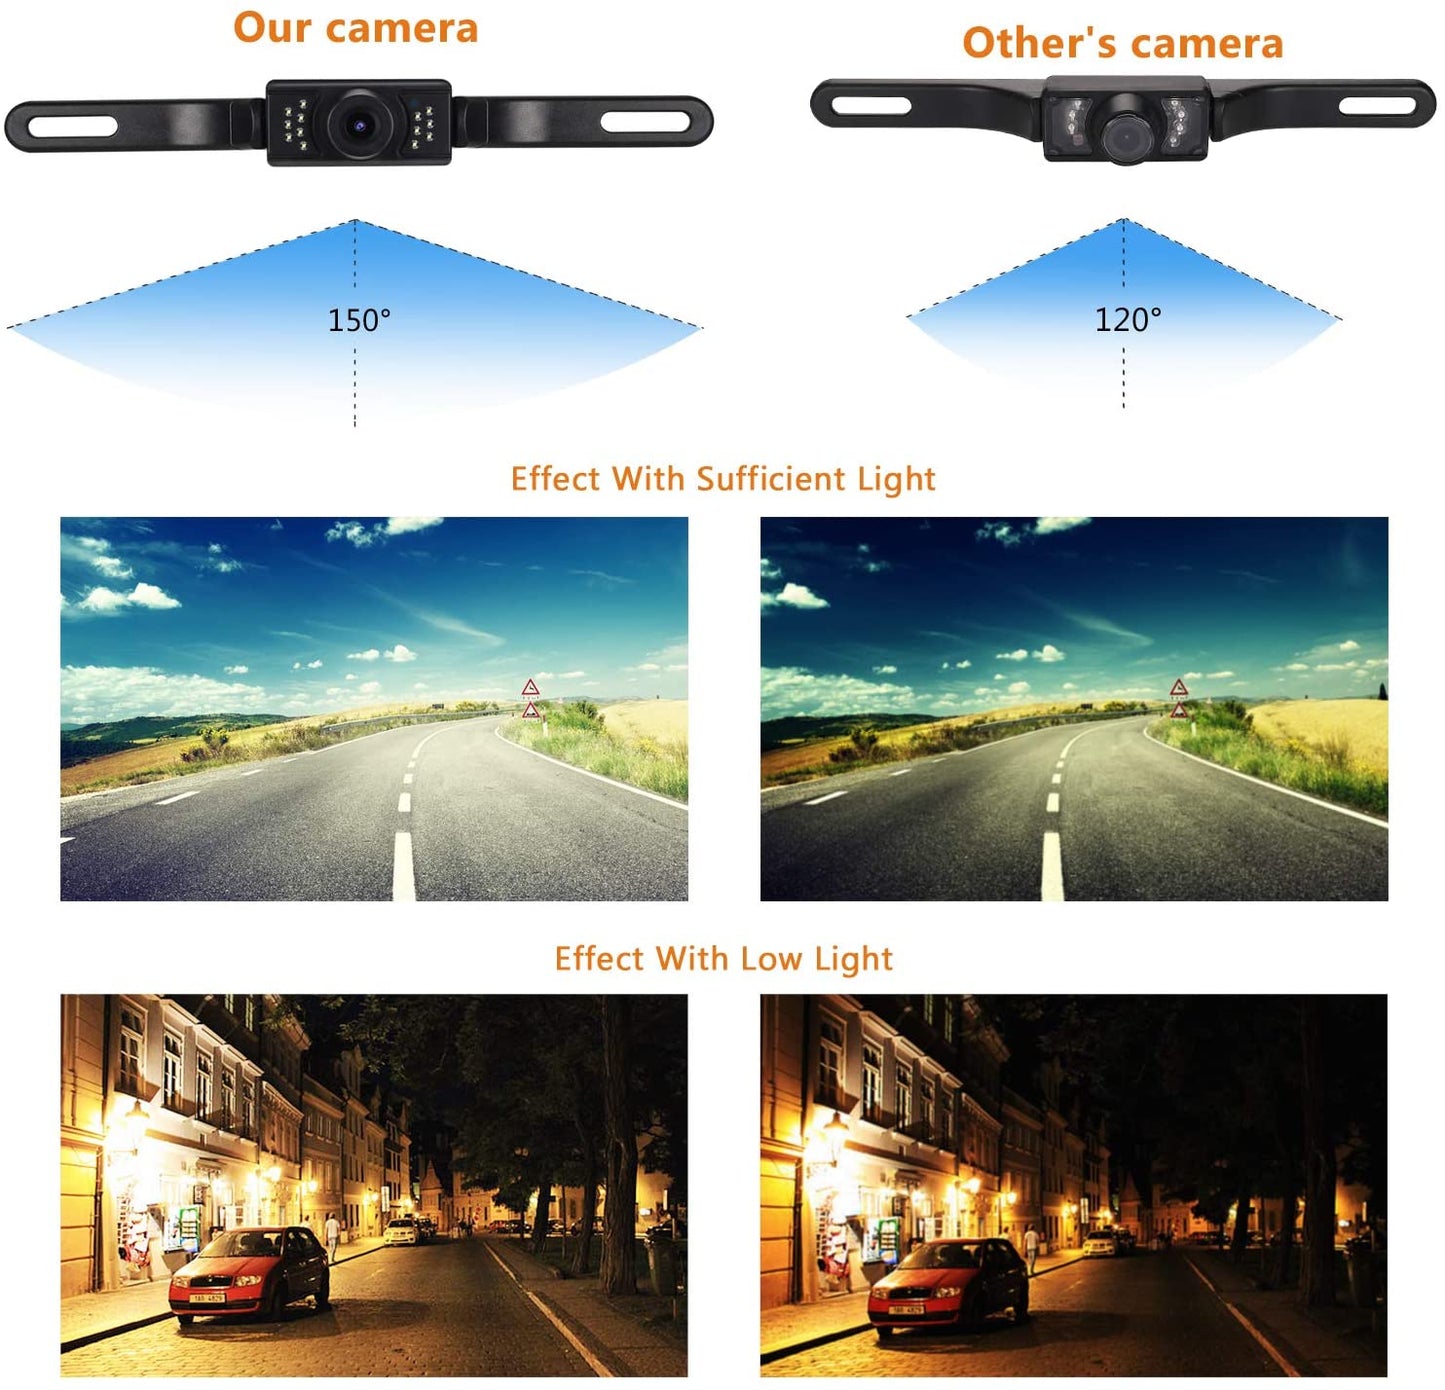 Backup Camera and Monitor Kit,RAAYOO 2020 Upgrade 2nd Generation Car Rear View Reversing Camera Automotive with 150° Perfect View Angle 13 Auto-Lighting LED Lights Night Vision IP69 Level Waterproof - (For 6 piece(s))